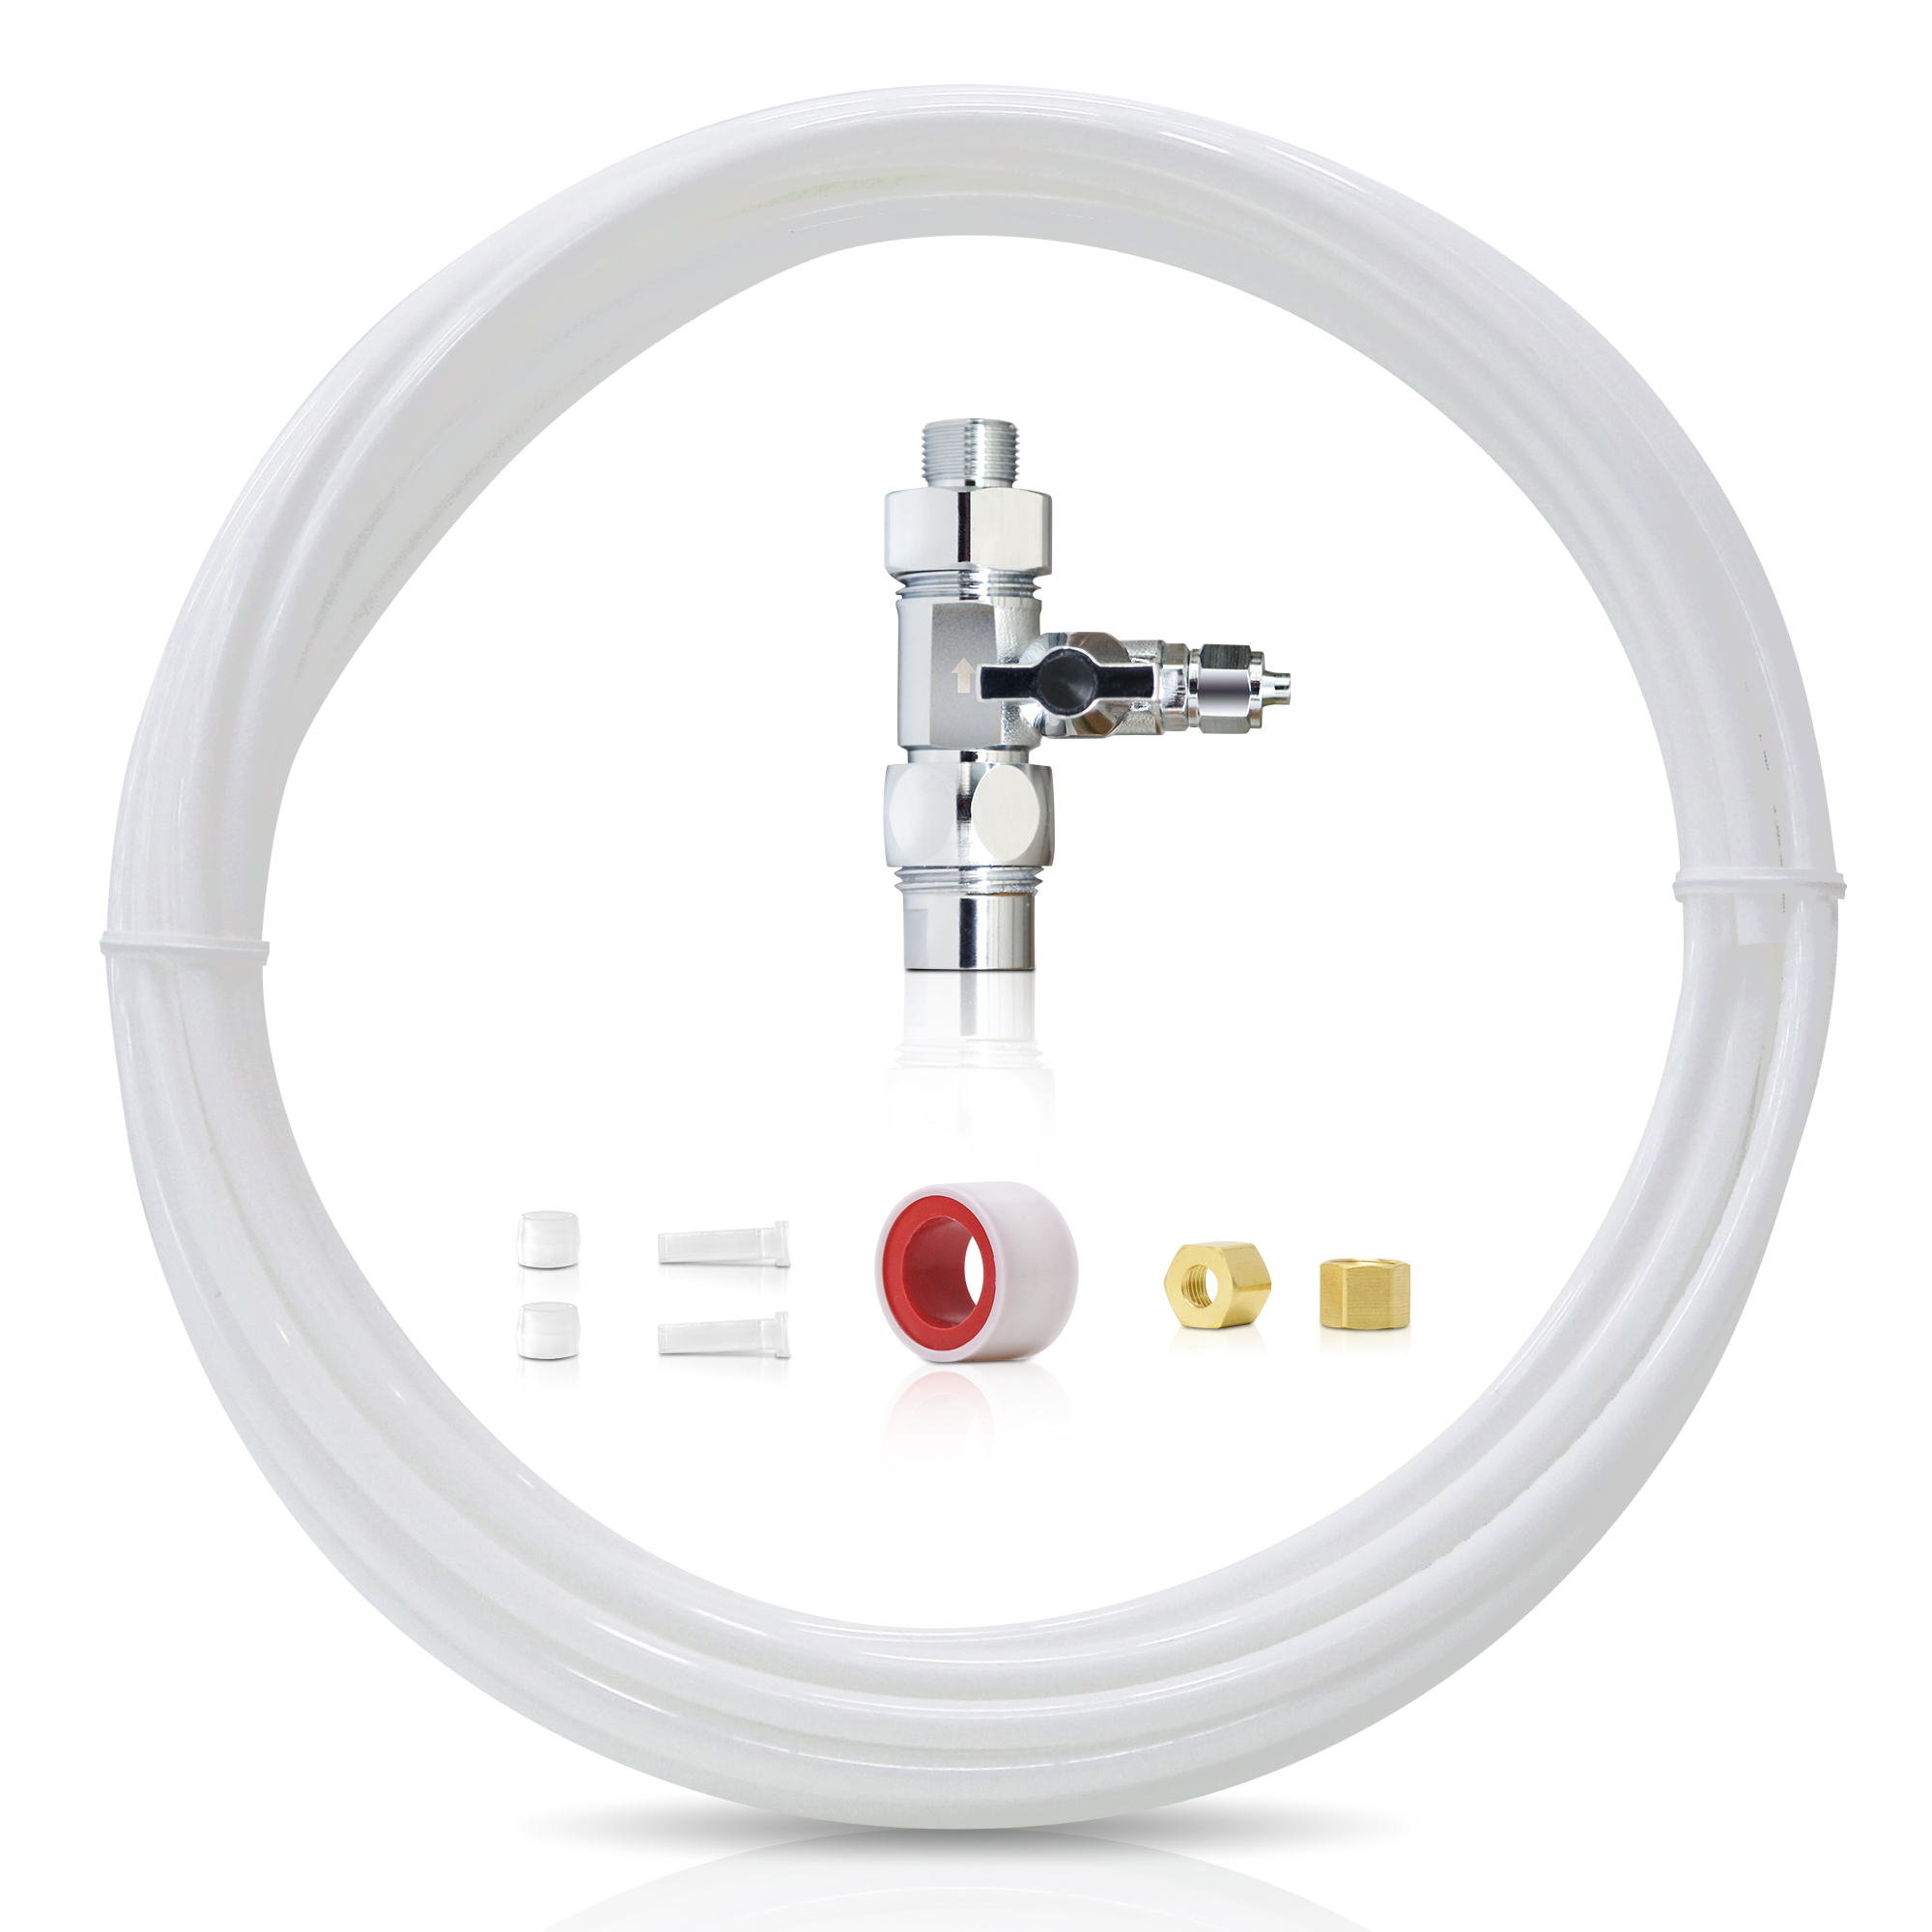 Waterdrop Fridge/ Ice Maker Water Line Connection Kit for WD-10/15/17UA Series, CuZn UC-200 other Braid Hose Connect Water Filter System with 3/8 or 1/2 inches fittings - image 1 of 6